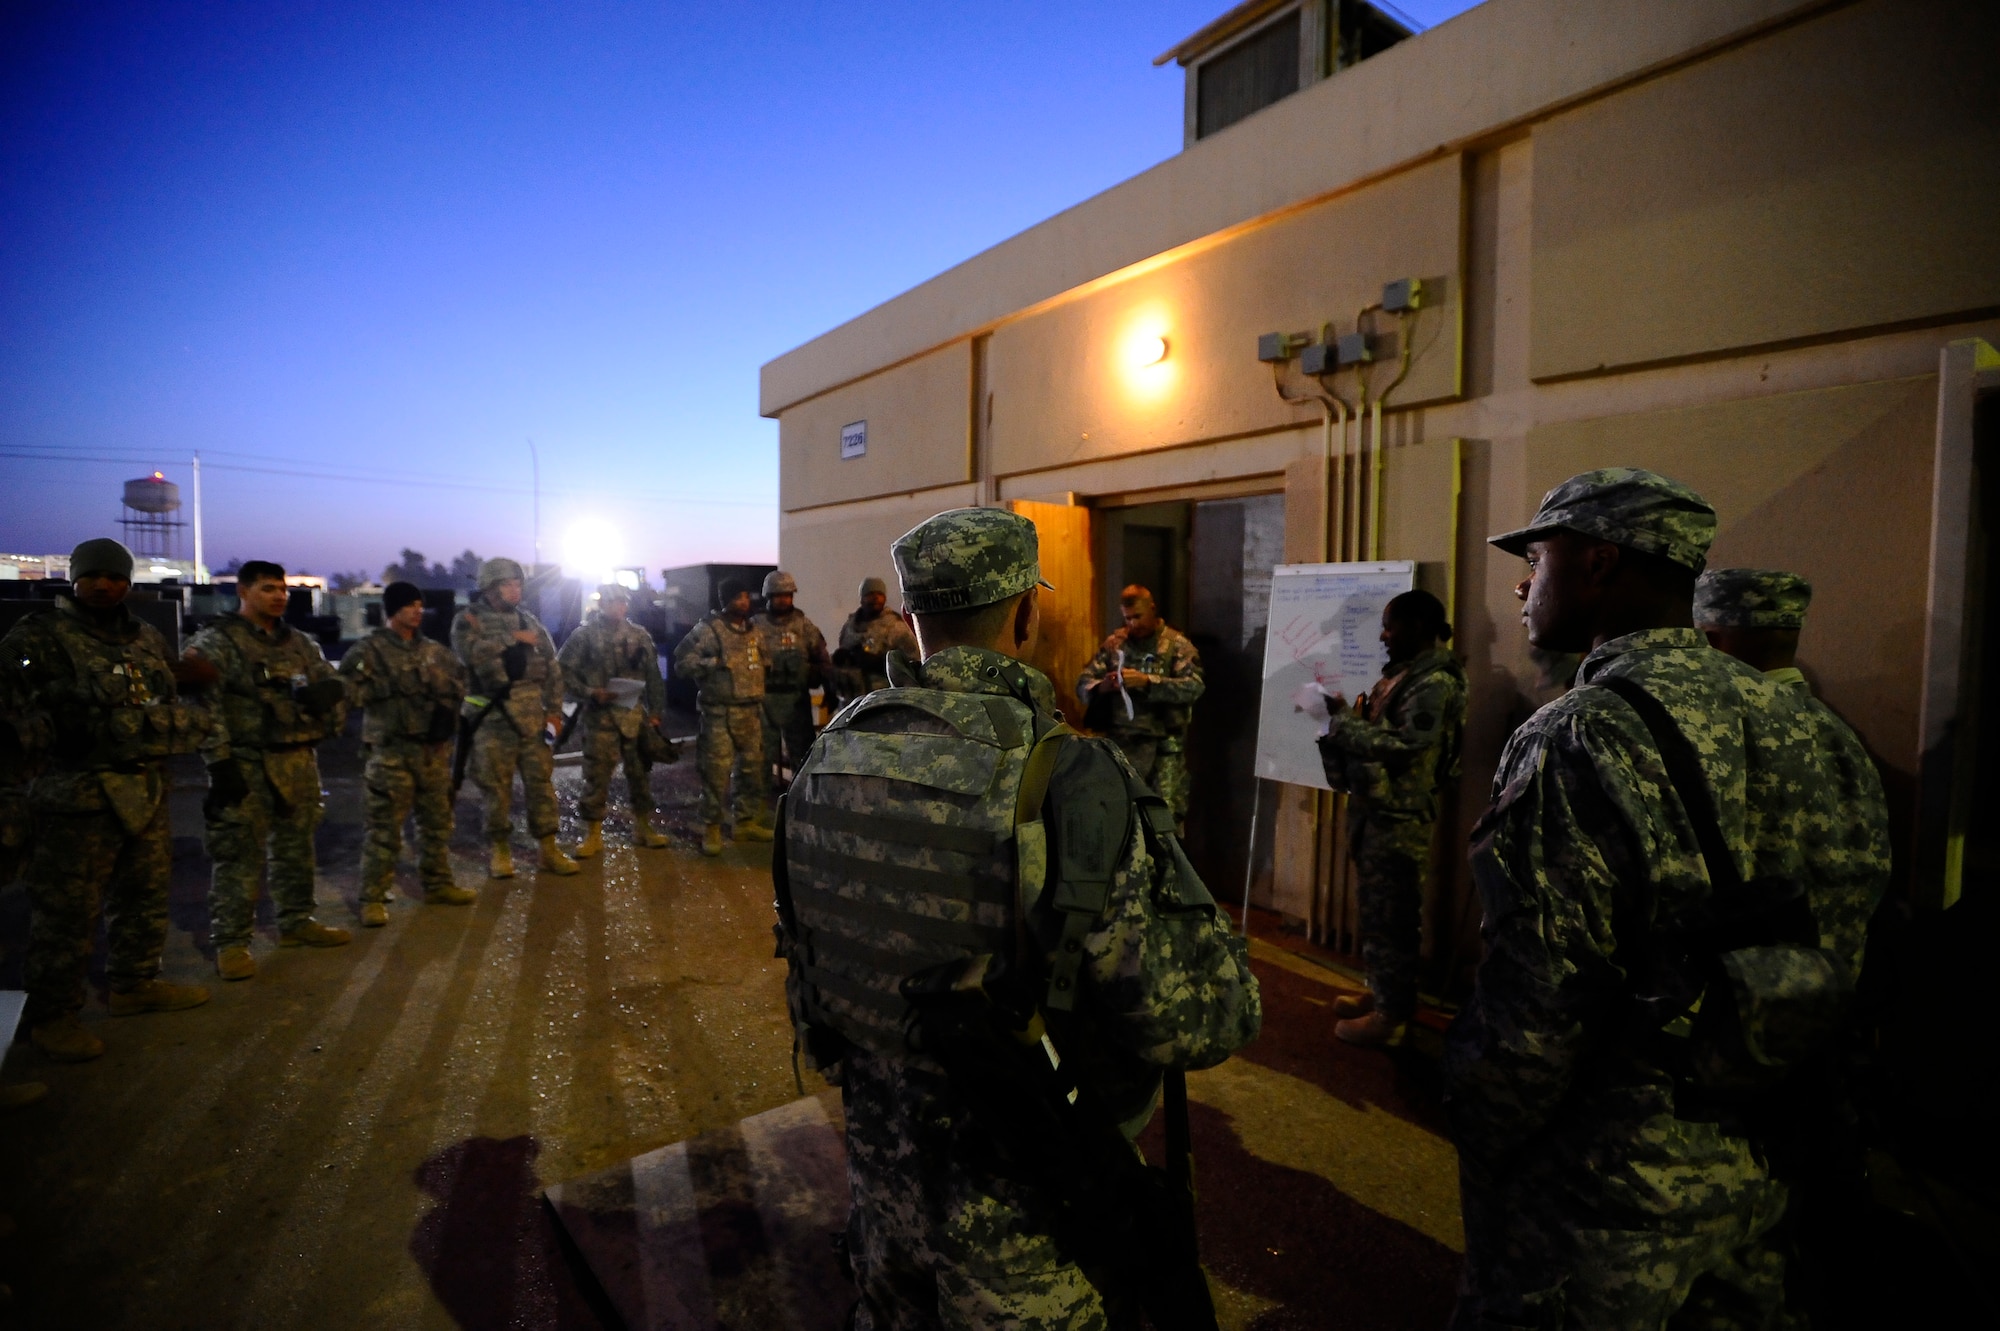 Airmen and Soldiers gather for a briefing at Joint Base Balad, Iraq, prior to an outside-the-wire mission Dec. 11. The Airmen, who are assigned to the 732nd Expeditionary Civil Engineer Squadron Detachment 6, undertake construction projects for the Army, while the Soldiers provide convoy security. (U.S. Air Force photo/Airman 1st Class Jason Epley)